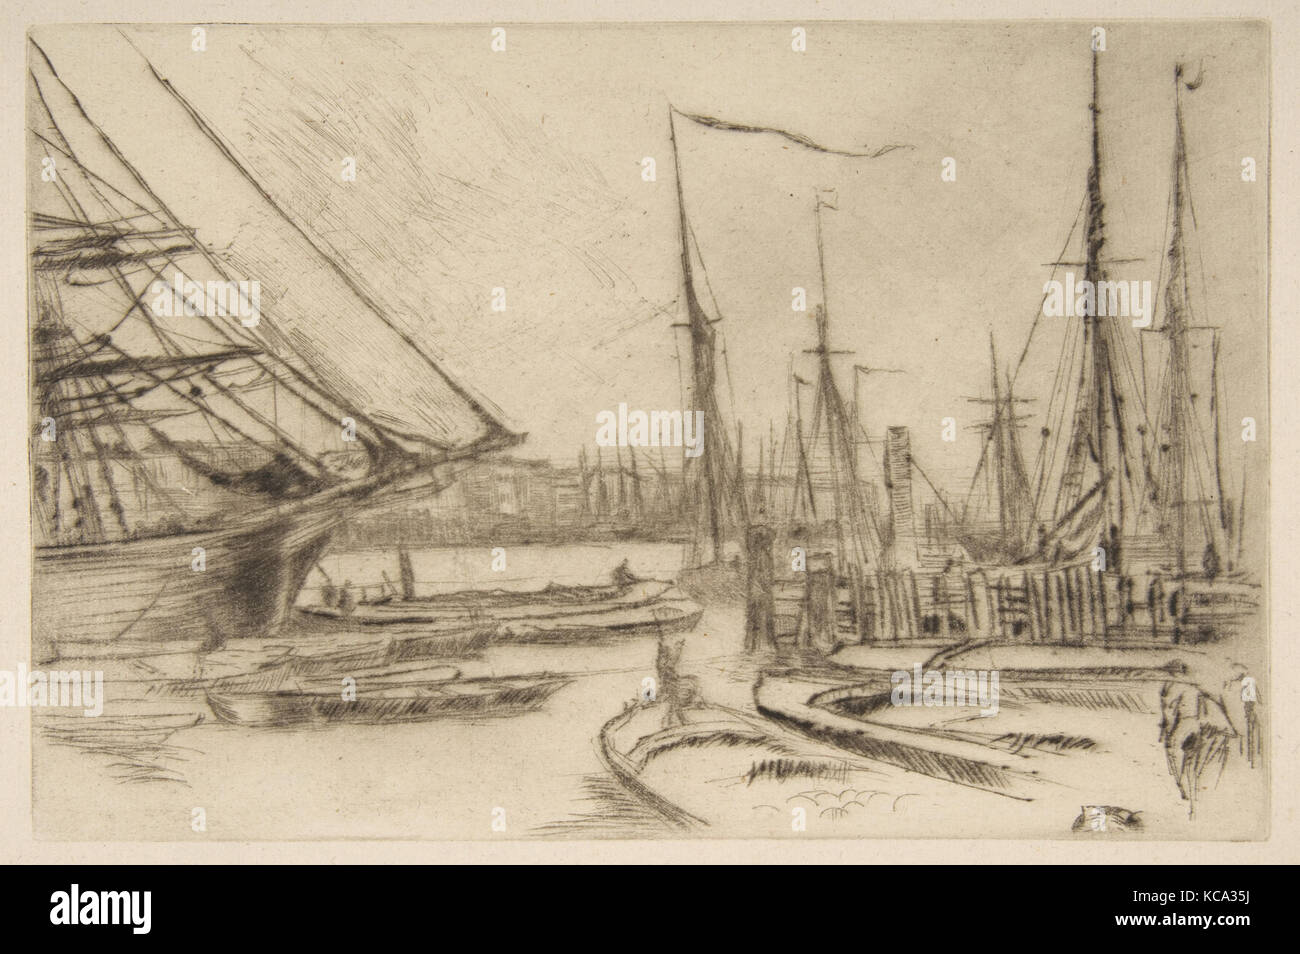 A Sketch from Billingsgate (From Billingsgate), James McNeill Whistler, 1878 Stock Photo